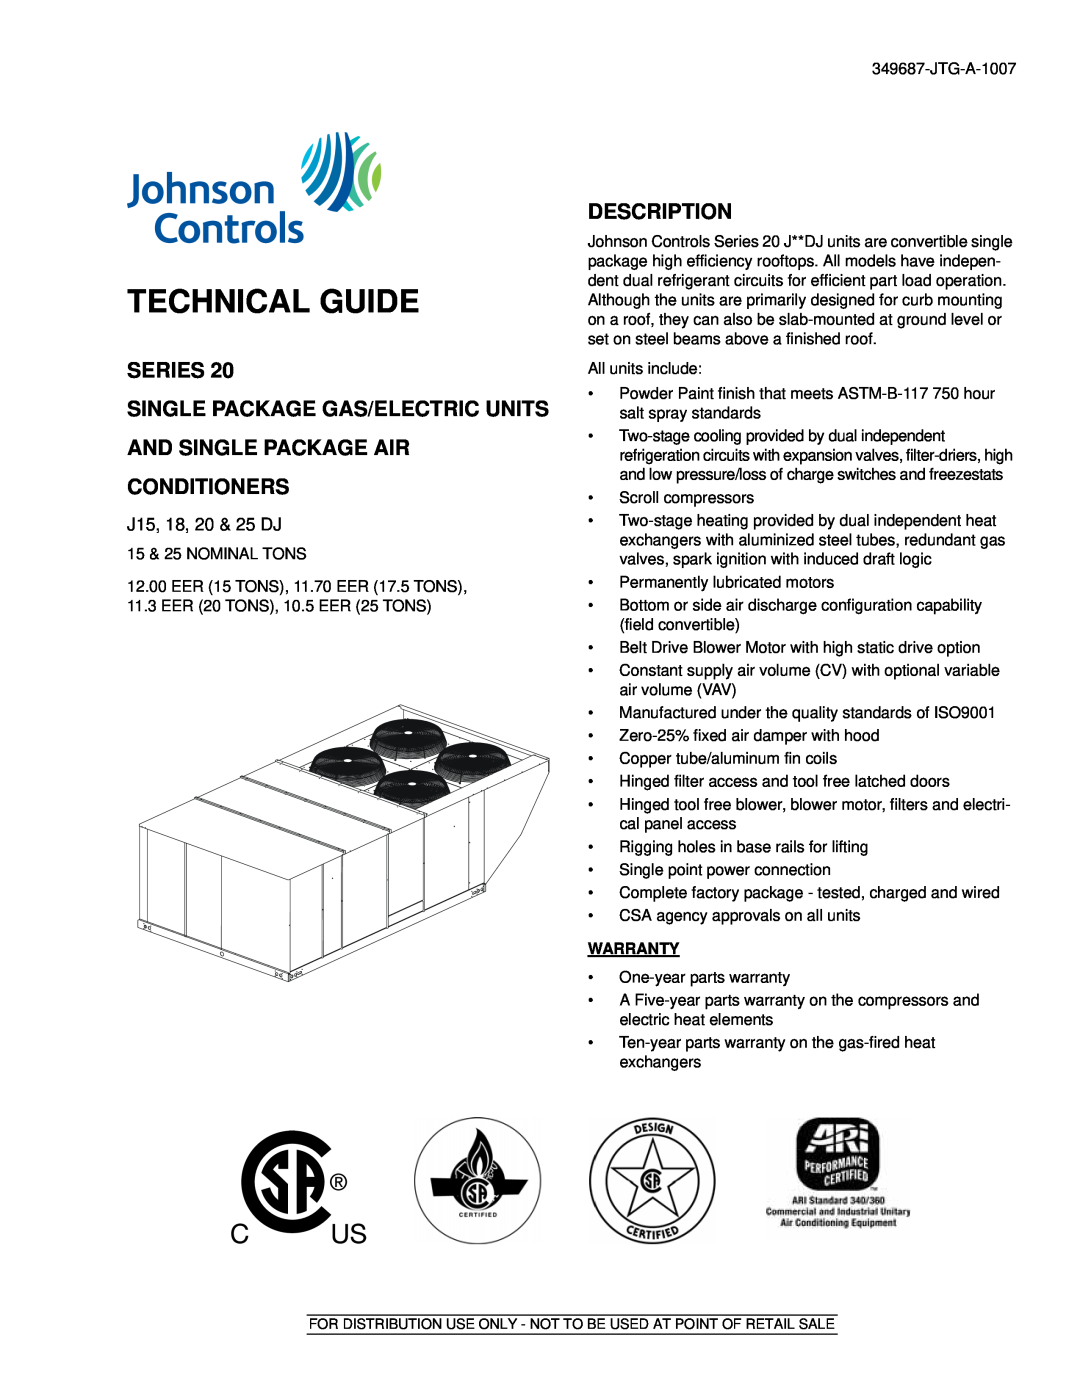 Johnson Controls J15 warranty Series Single Package Gas/Electric Units, And Single Package Air Conditioners, Description 